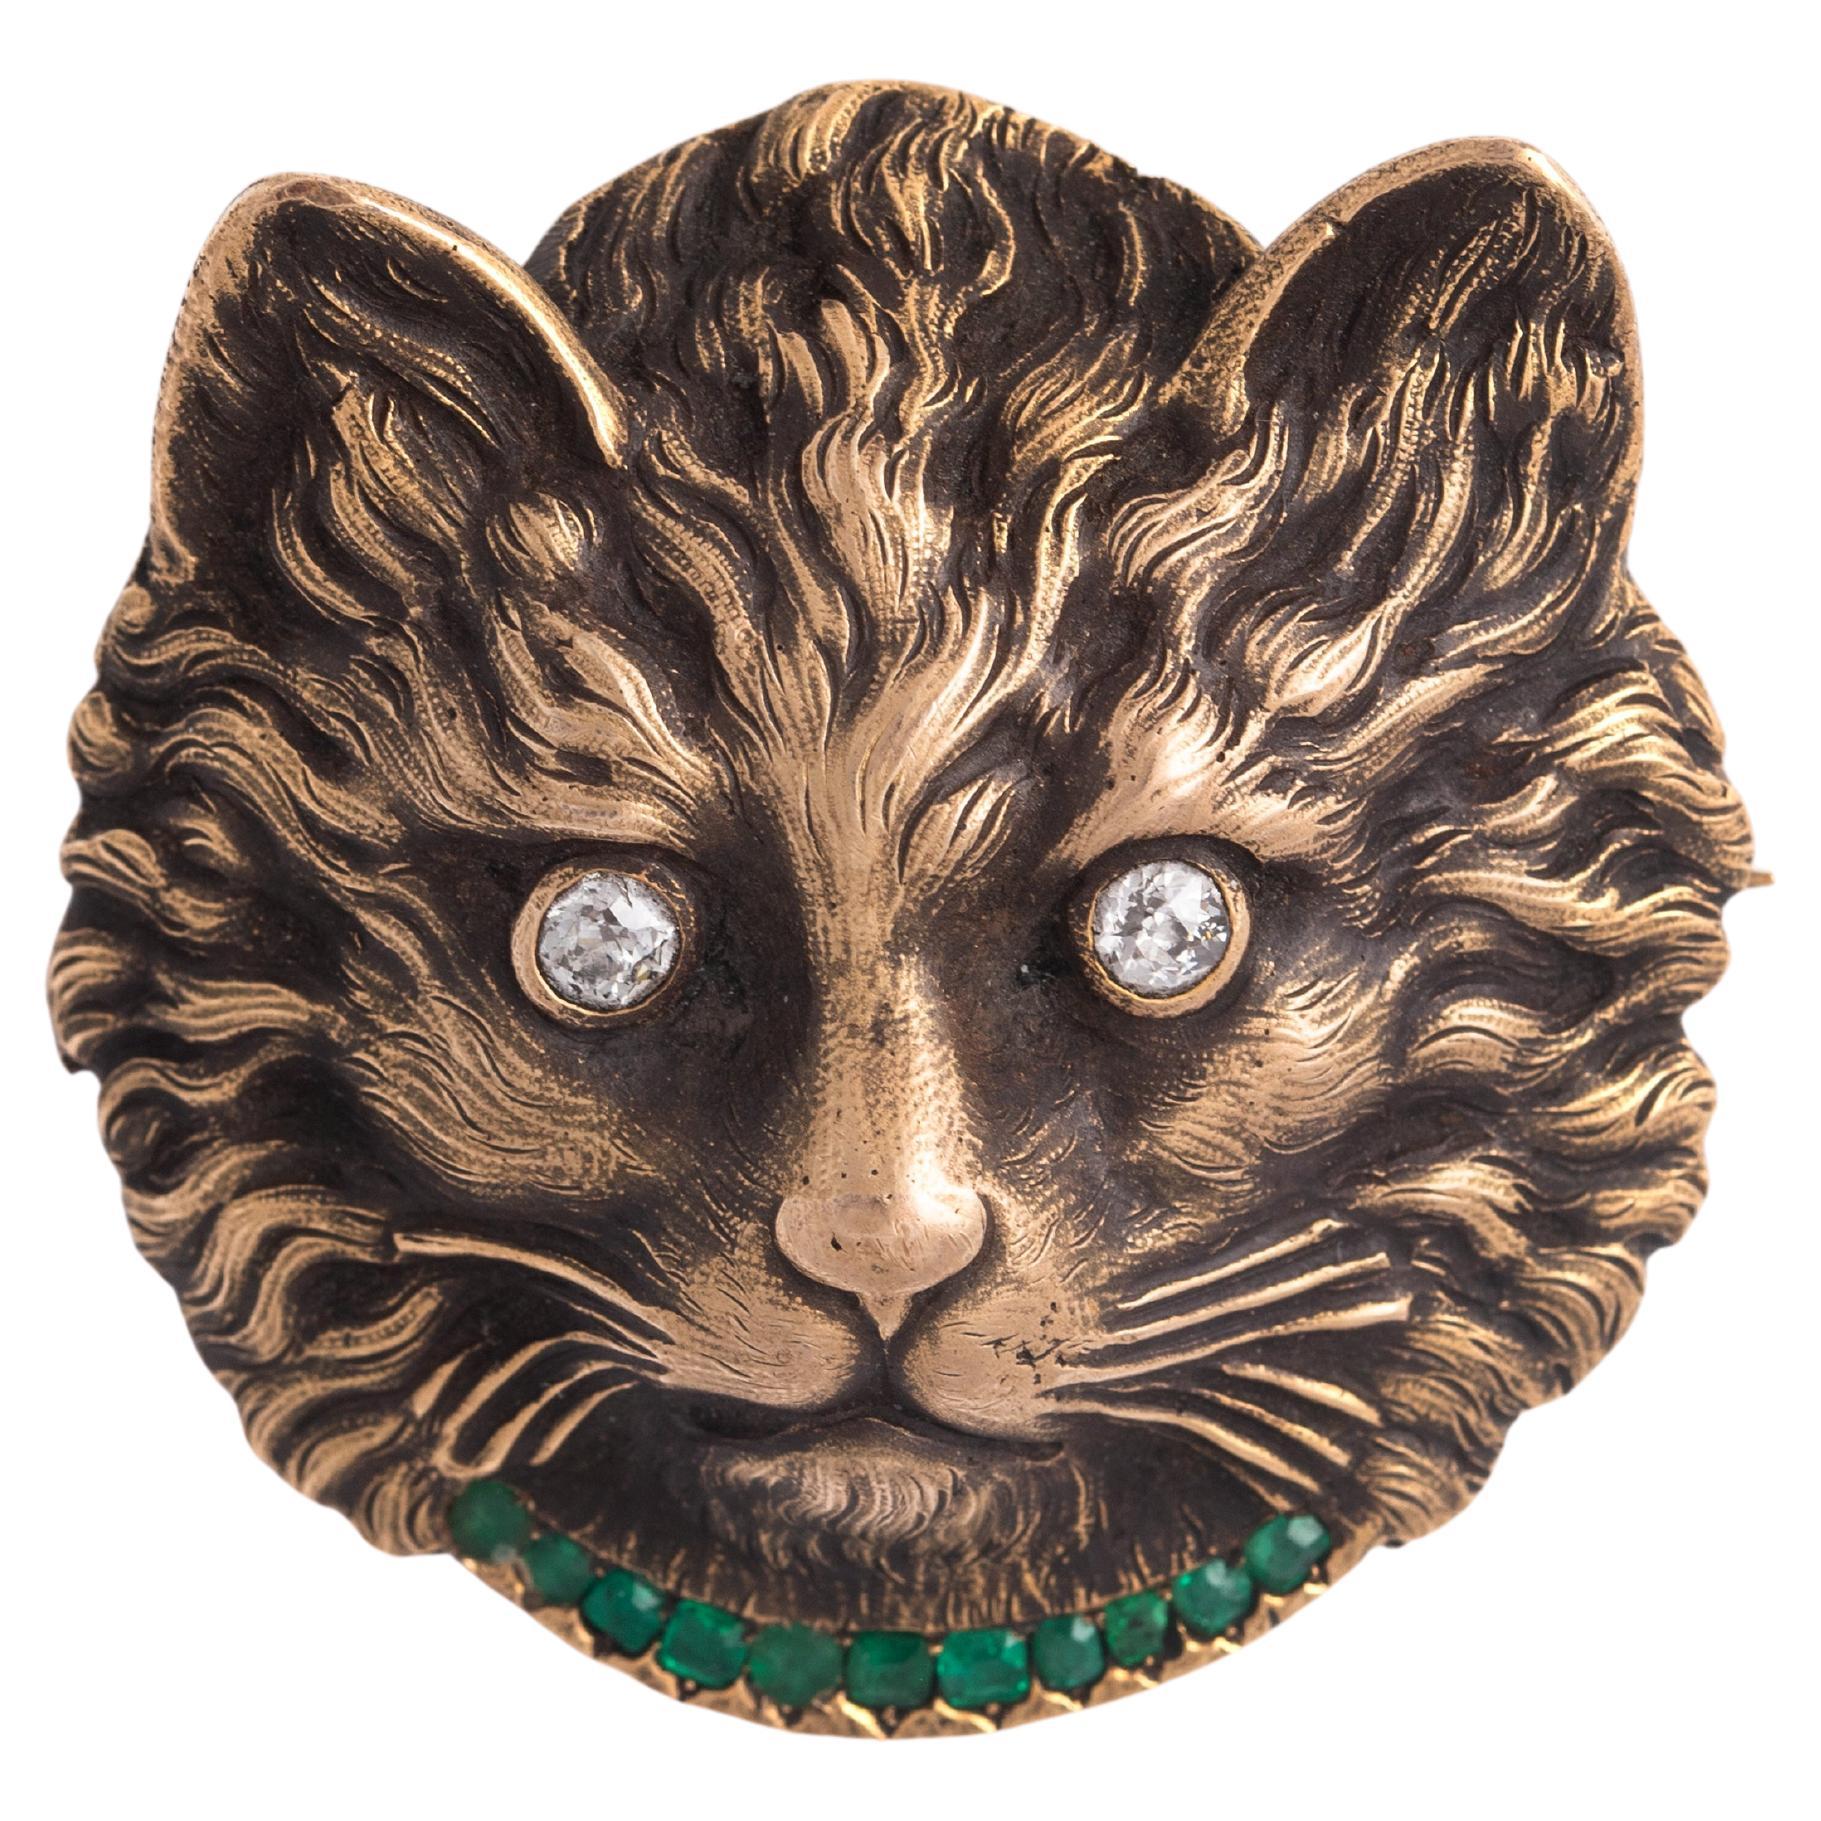 Cat's face Diamond Emerald Brooch Early 20th Century For Sale